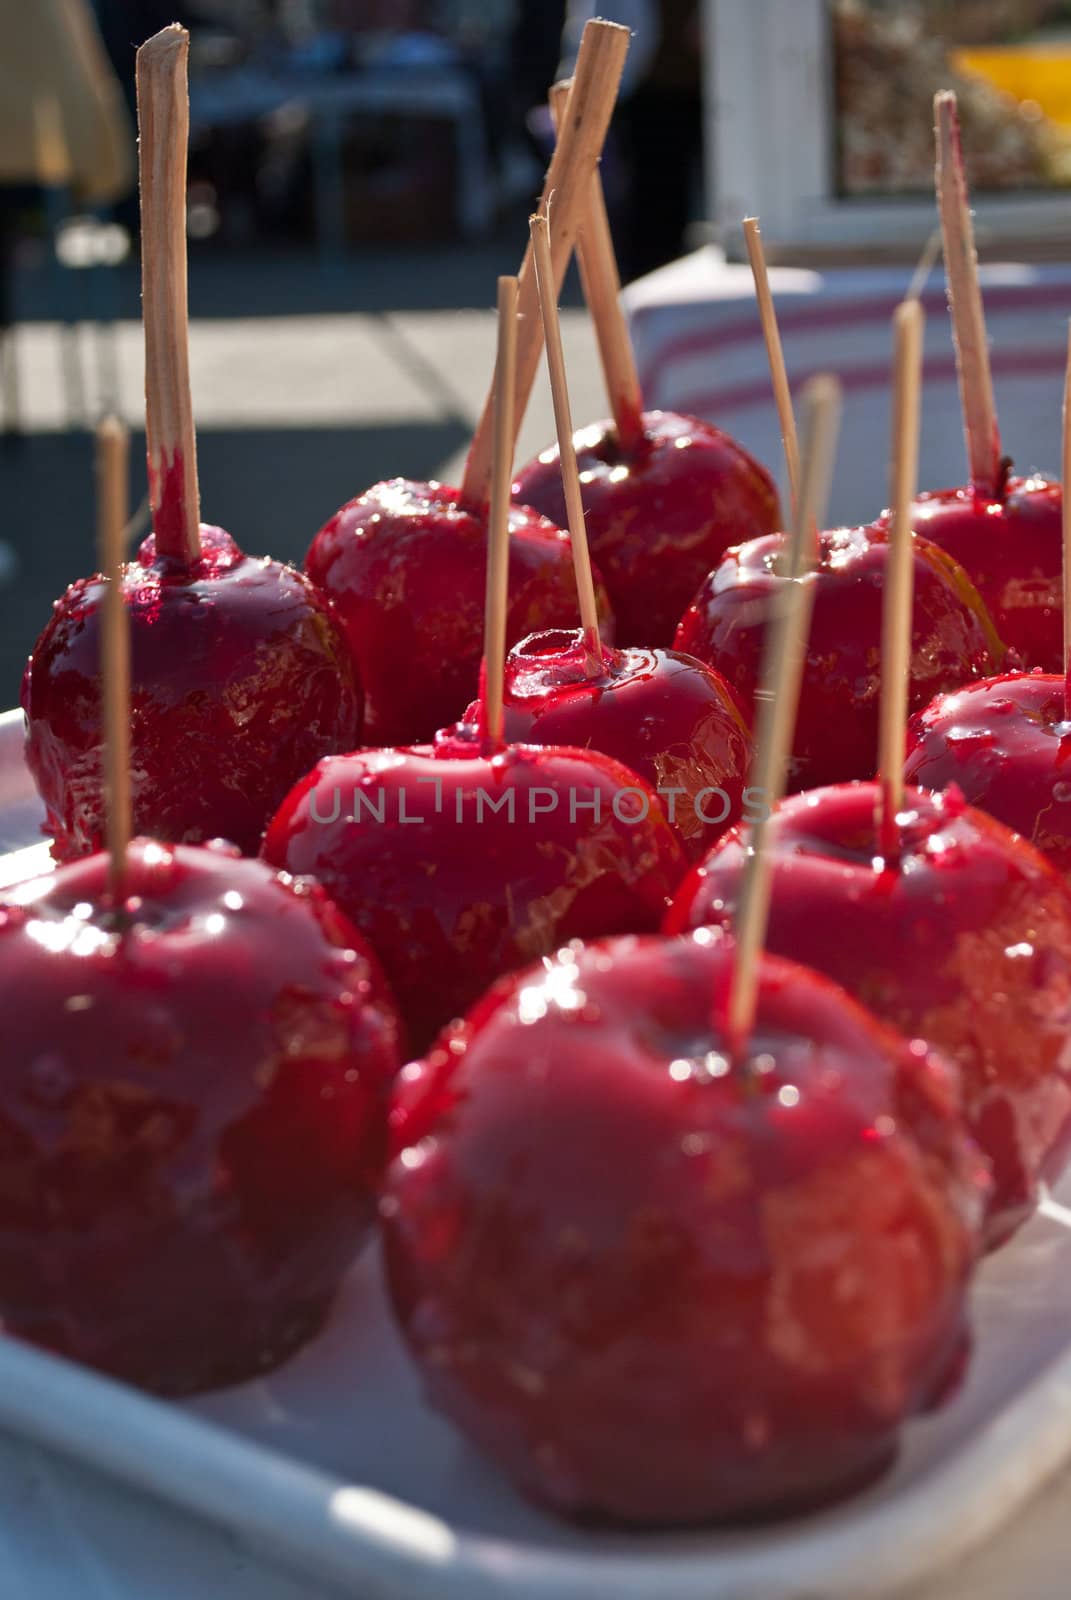 Red, sweet candy apples with wooden sticks